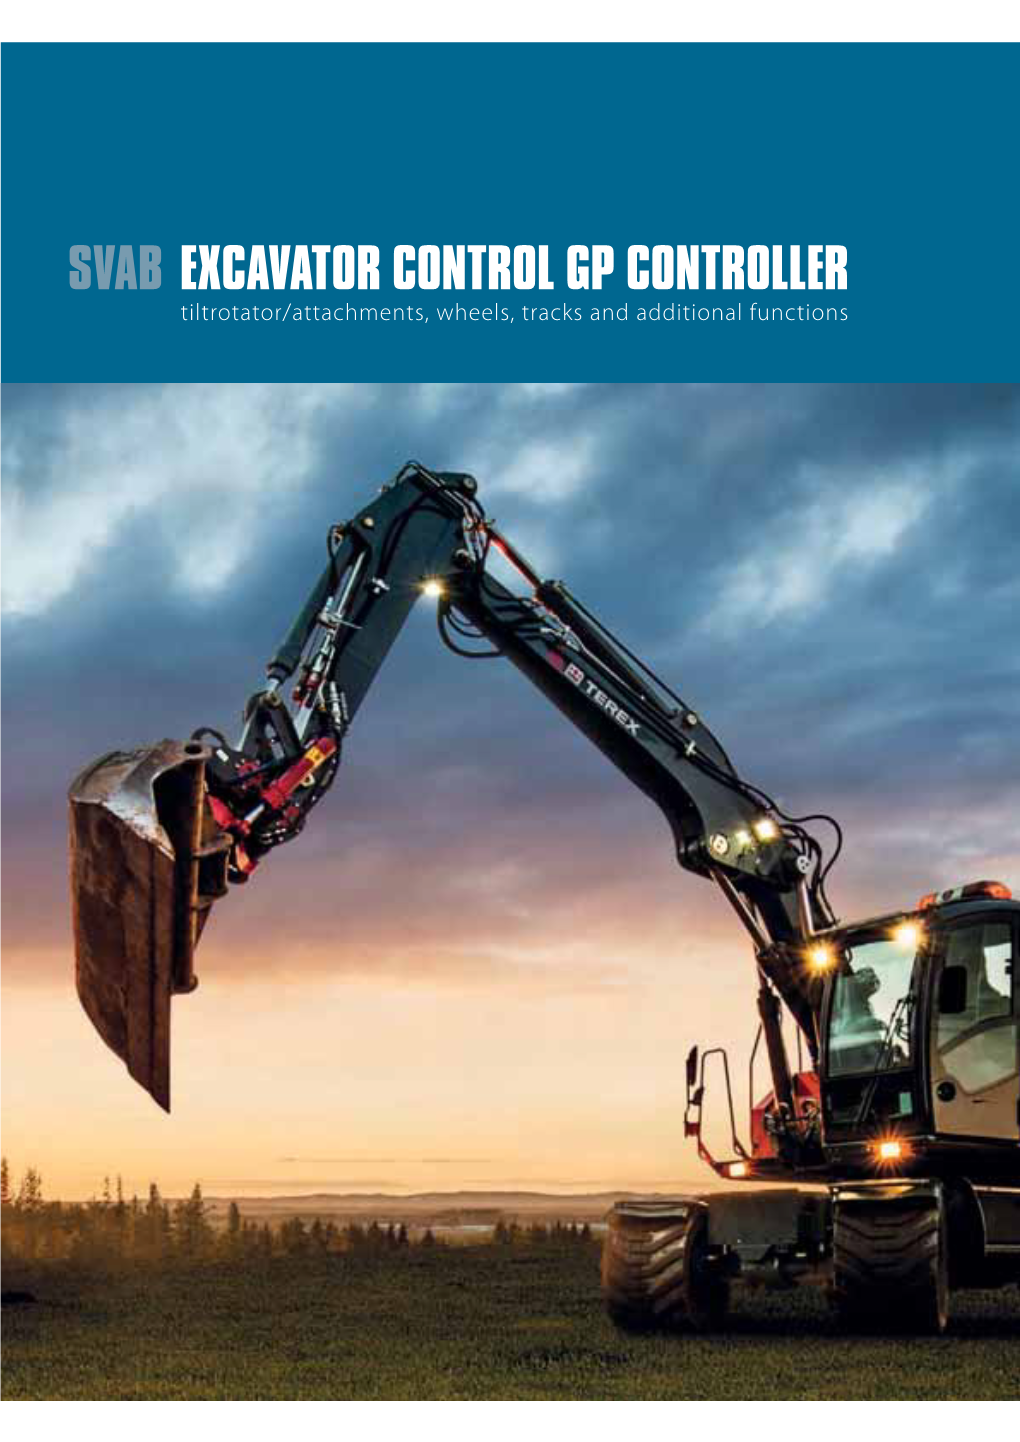 SVAB EXCAVATOR CONTROL GP CONTROLLER Tiltrotator/Attachments, Wheels, Tracks and Additional Functions SOLUTIONS FOCUSED on BETTER OPERATOR ENVIRONMENTS